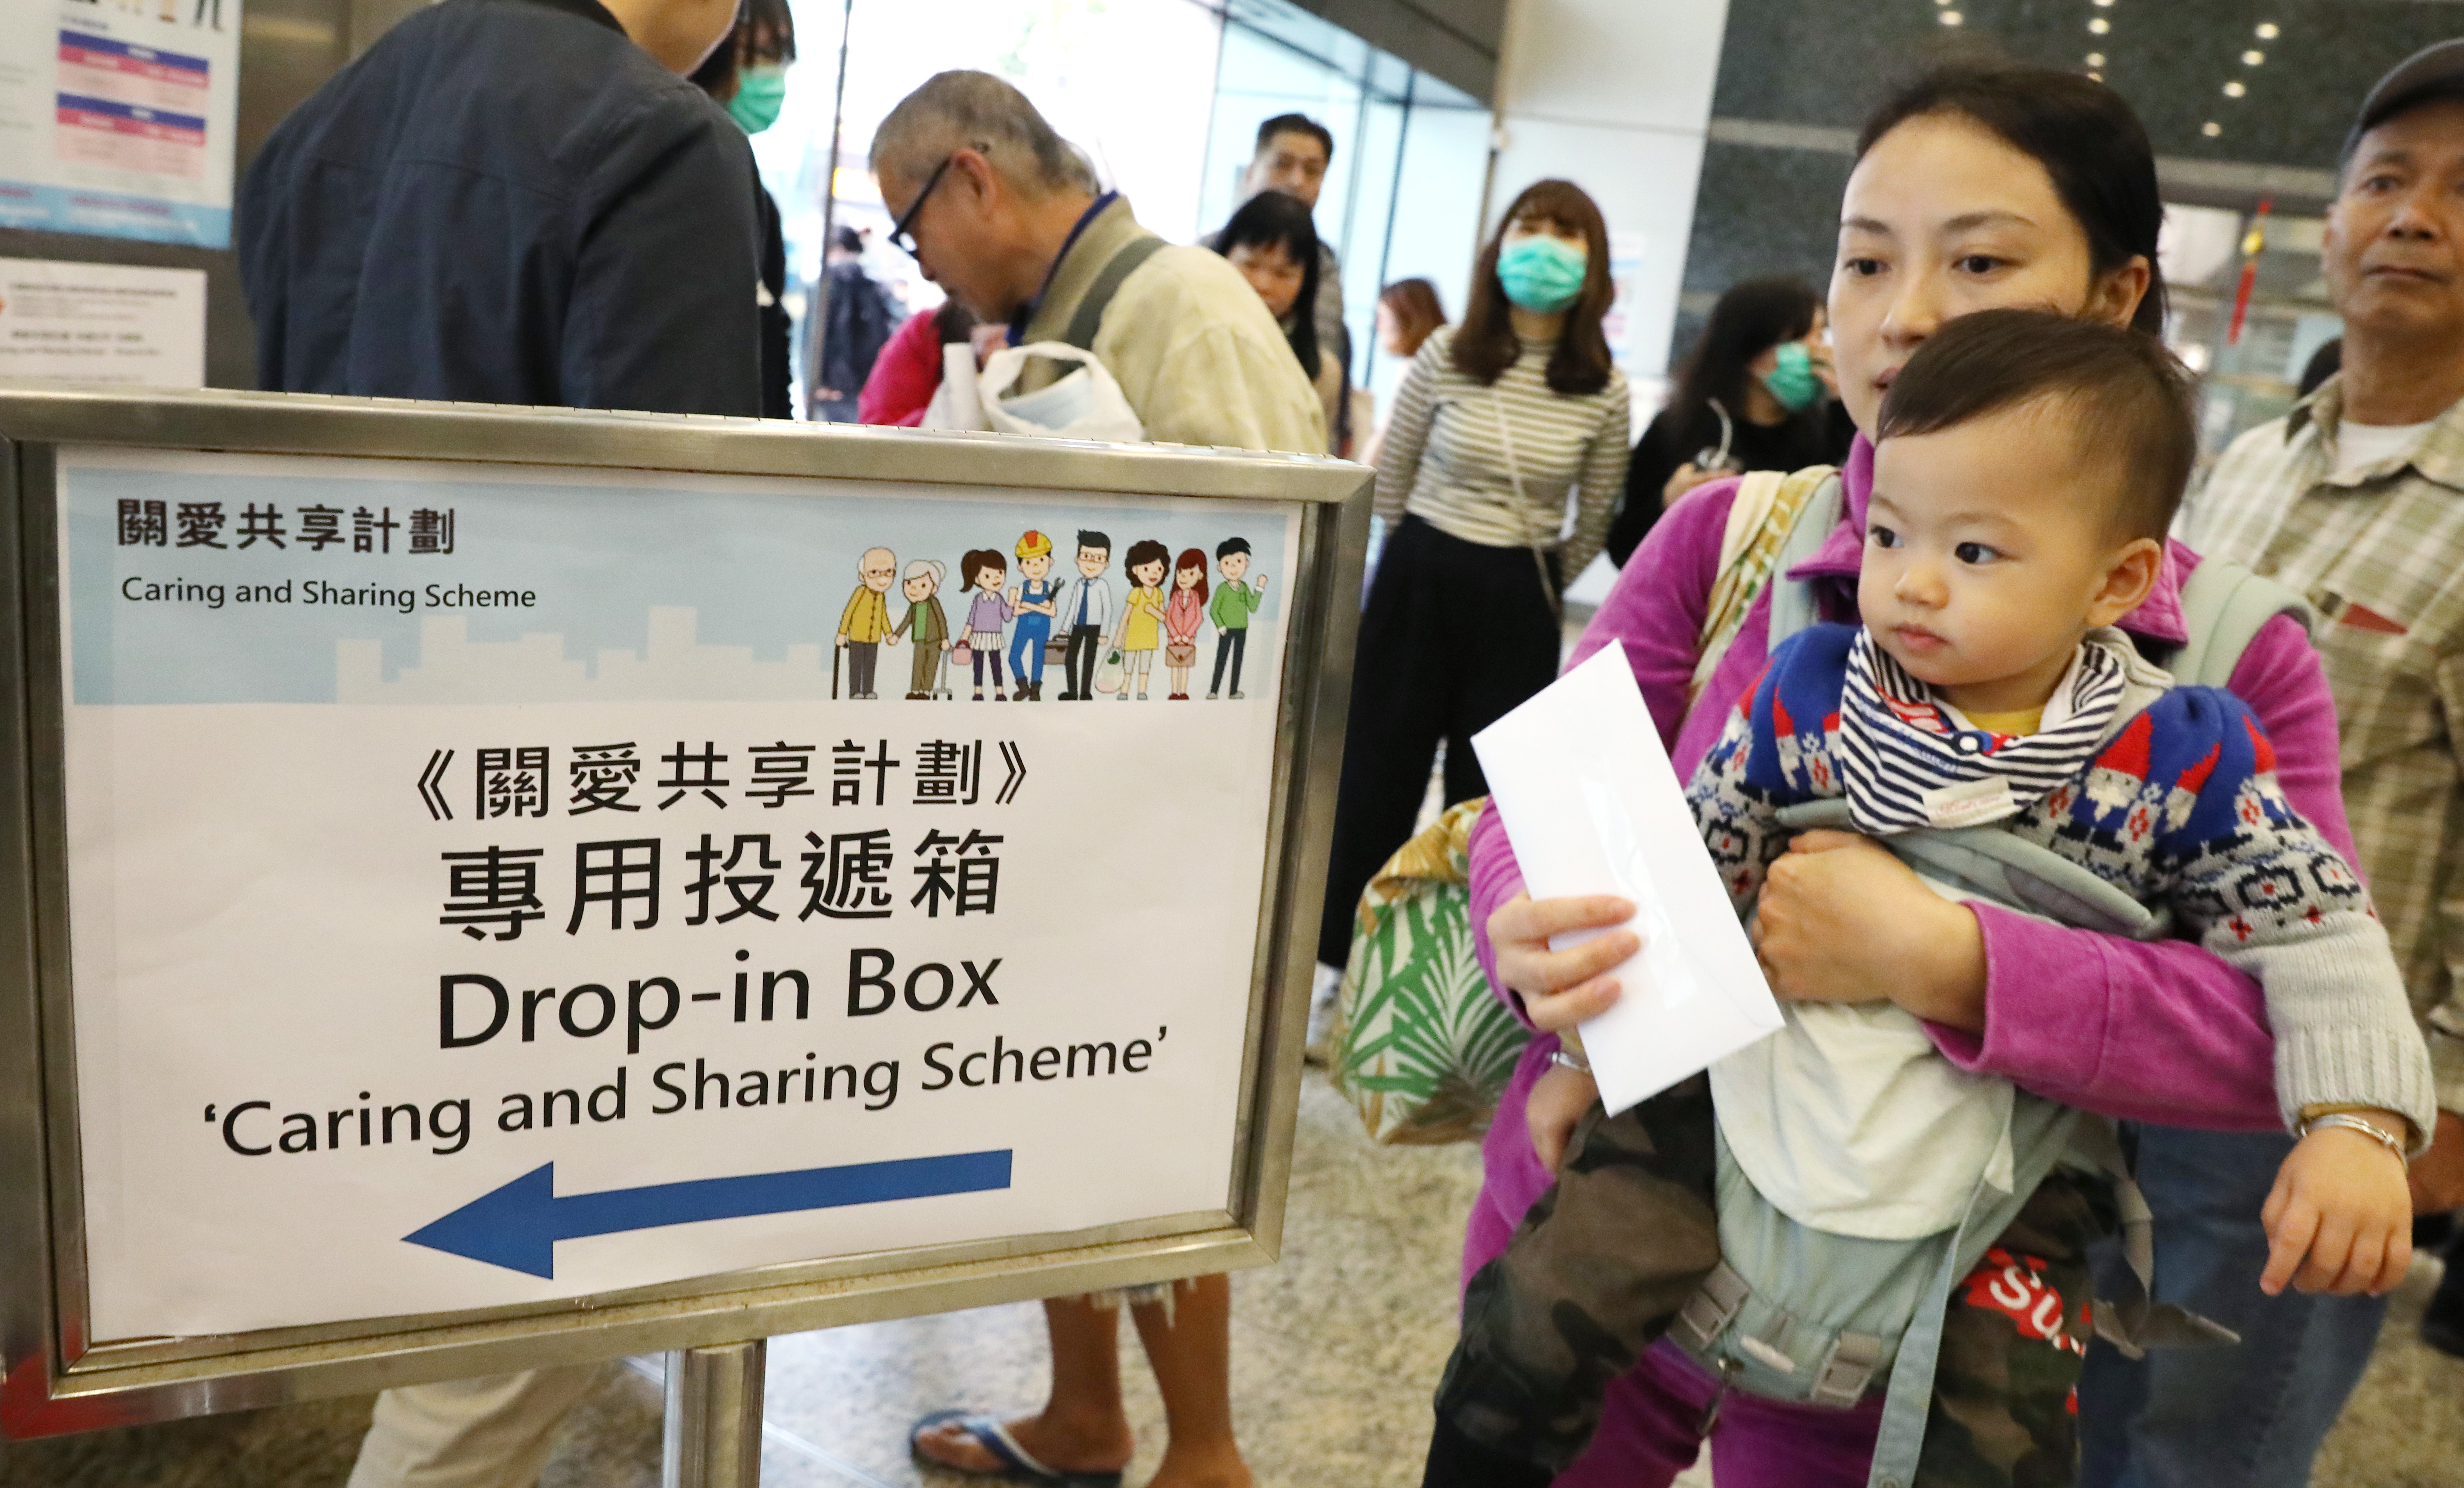 A young mother drops in her application for the Caring and Sharing Scheme at the Cheung Sha Wan Government office in Sham Shui Po. Photo: Dickson Lee